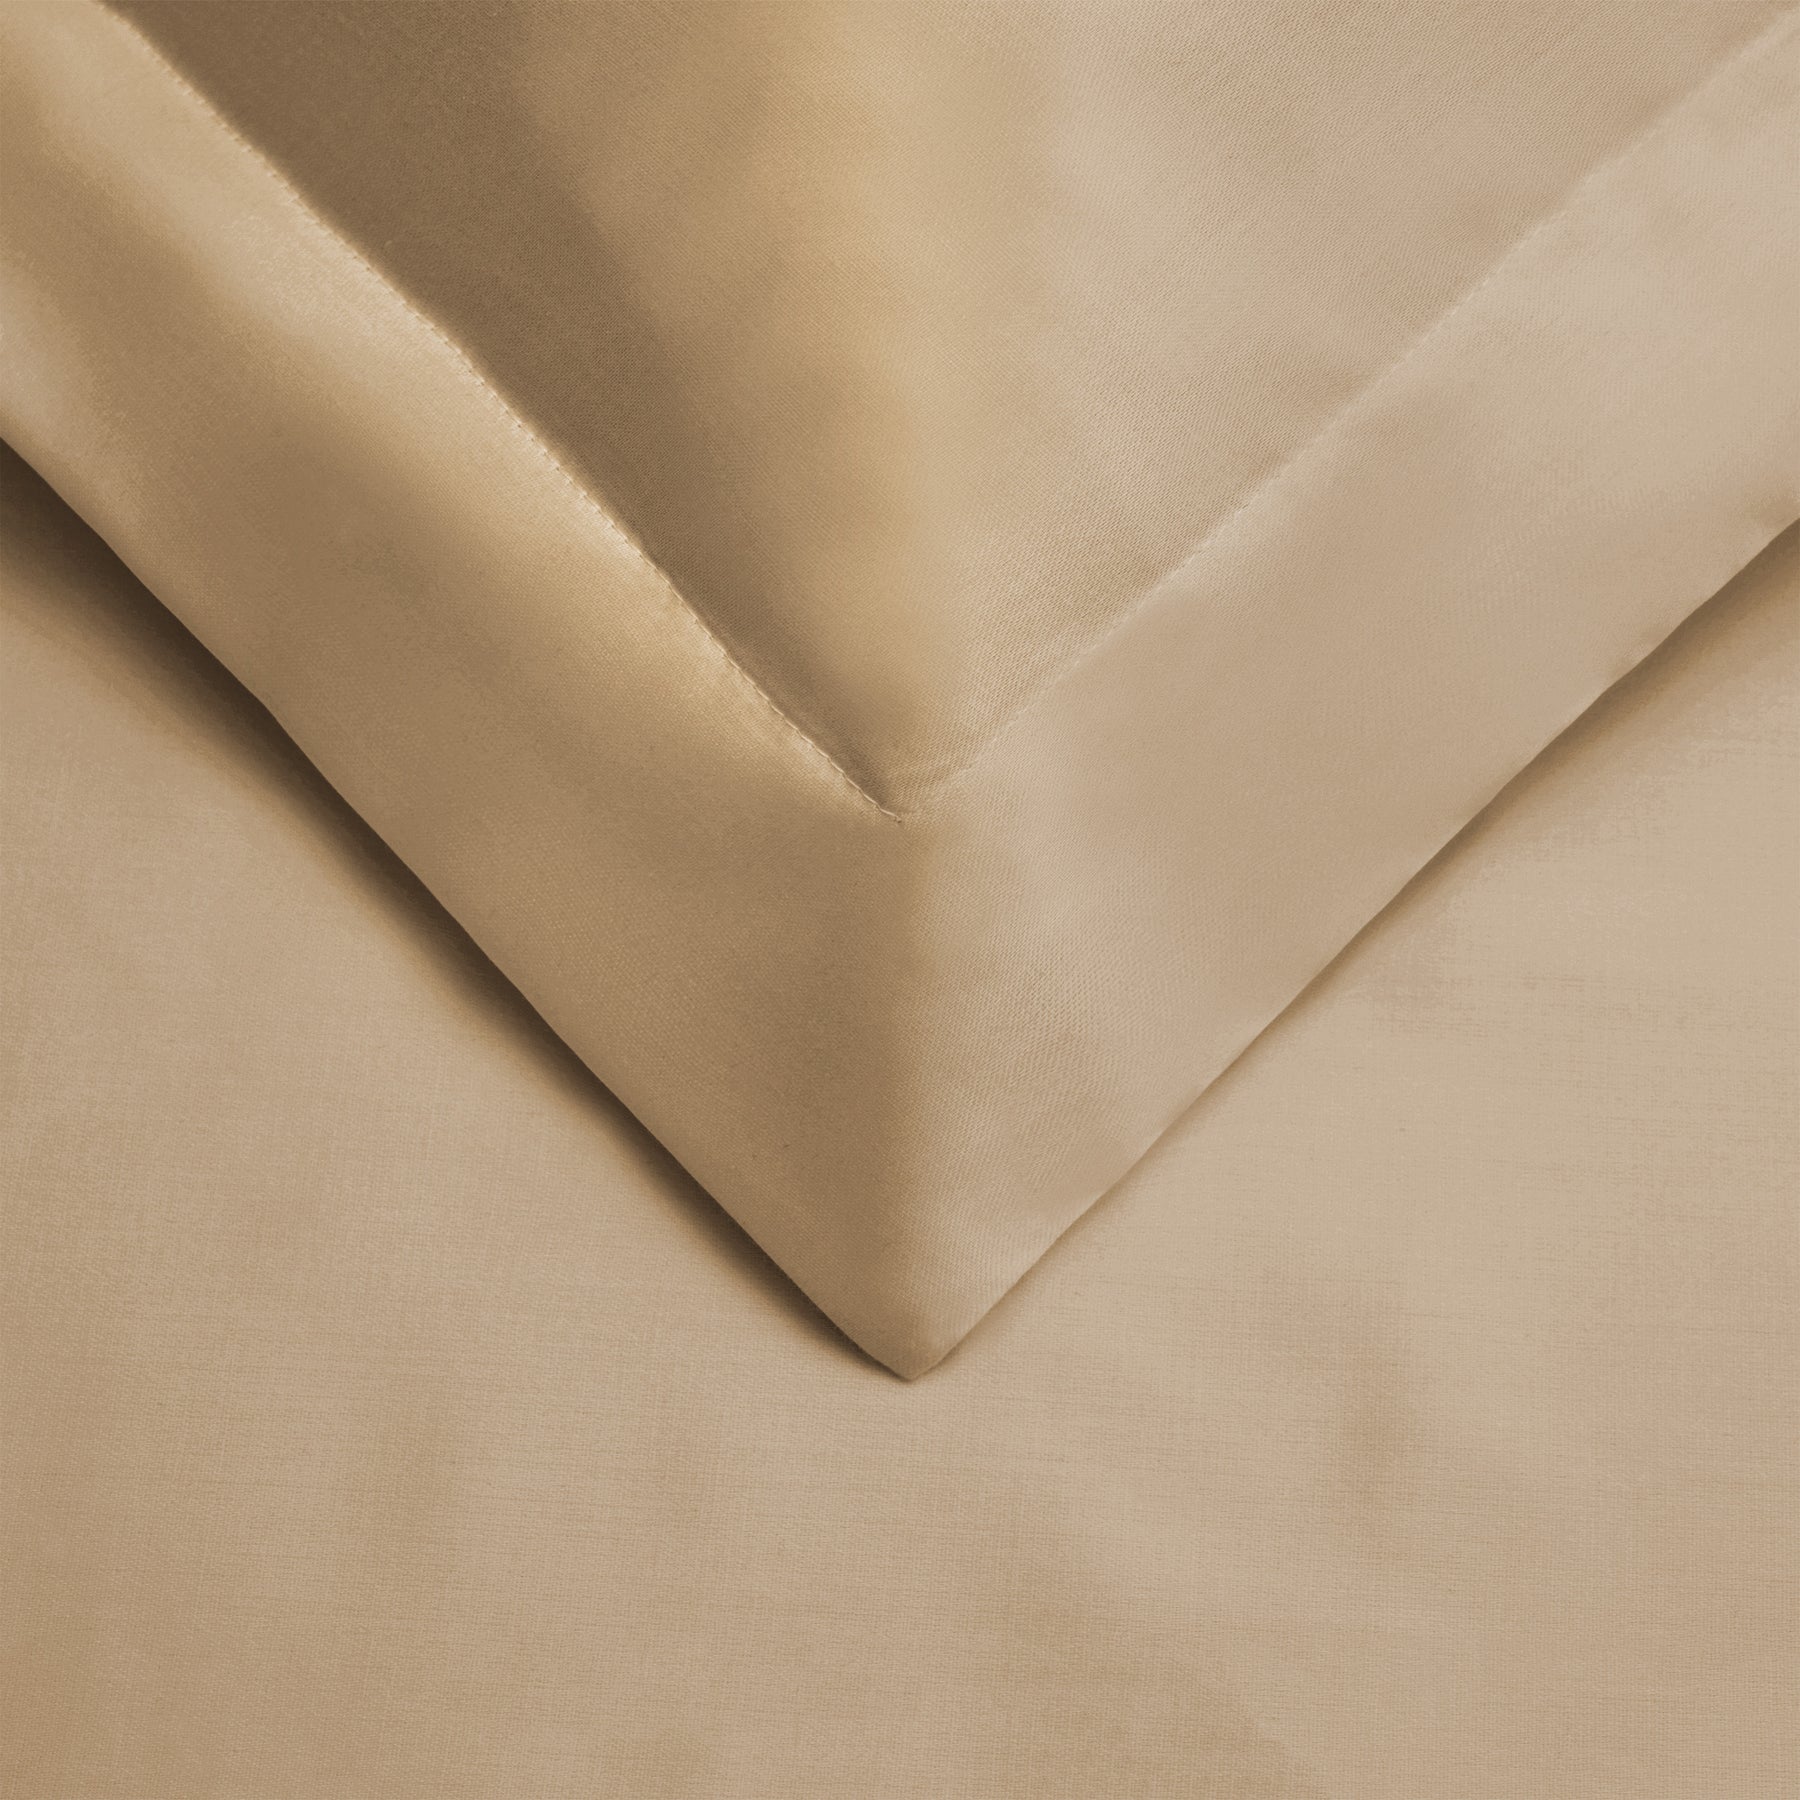 Superior Egyptian Cotton 300 Thread Count Solid Duvet Cover Set - Tan